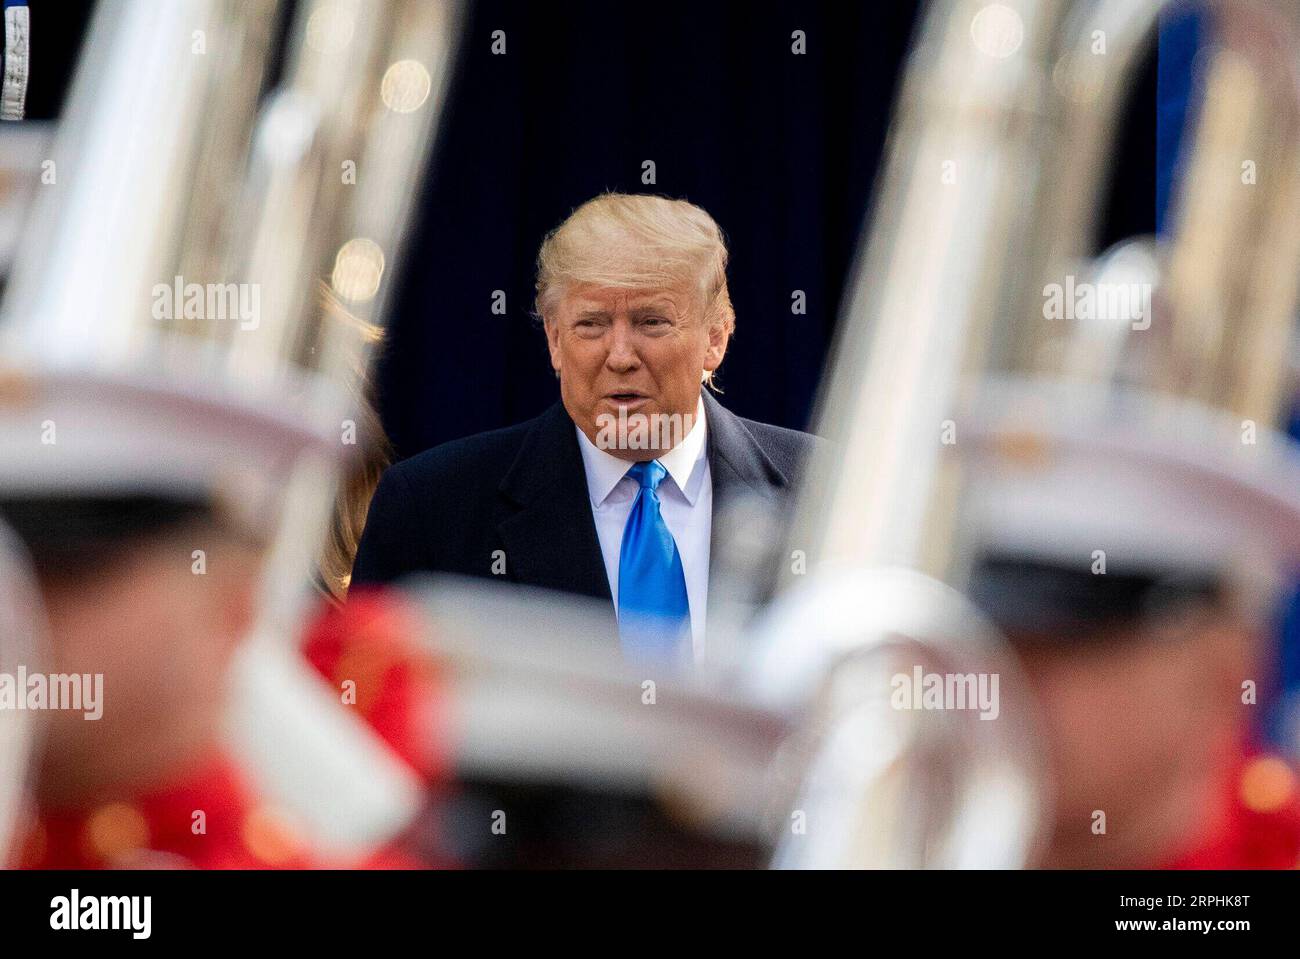 191111 -- NEW YORK, Nov. 11, 2019 -- U.S. President Donald Trump arrives for the opening ceremony of the Veterans Day Parade at the Madison Square Park in New York, the United States, on Nov. 11, 2019. U.S. President Donald Trump paid tribute to American veterans in New York on Monday, kicking off the city s 100th Veterans Day Parade.  U.S.-NEW YORK-DONALD TRUMP-VETERANS DAY WangxYing PUBLICATIONxNOTxINxCHN Stock Photo